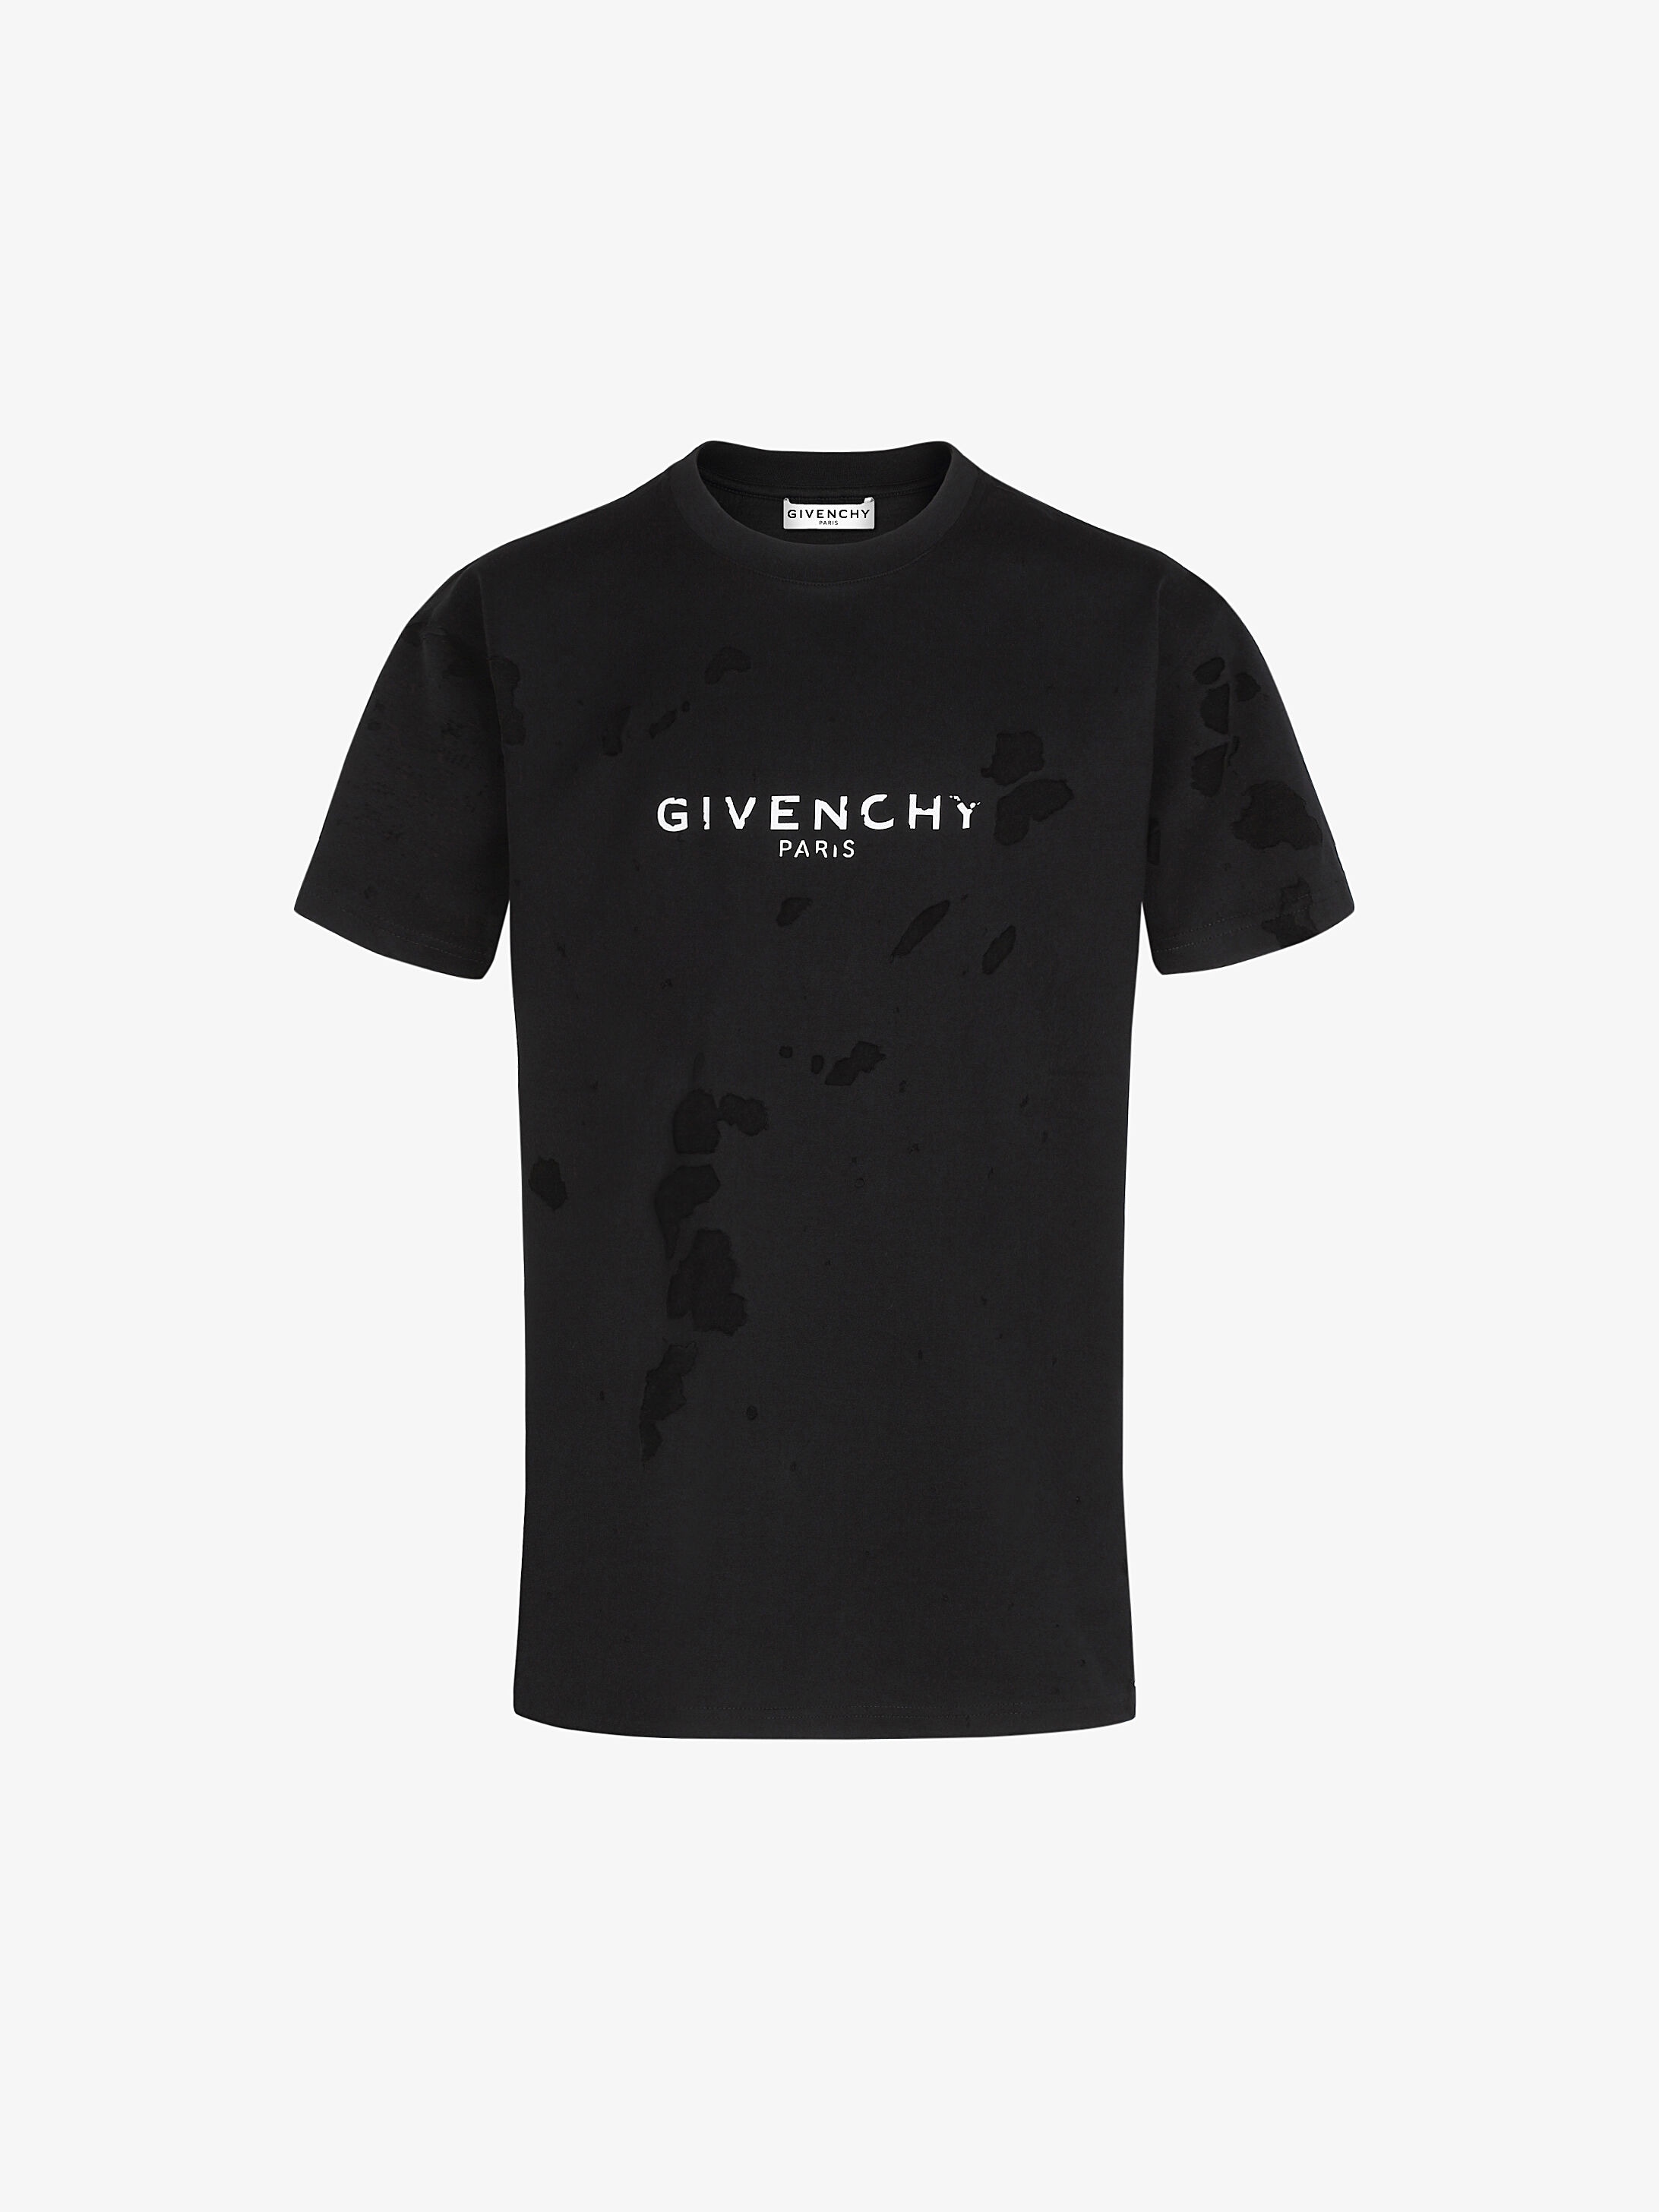 givenchy destroyed shirt